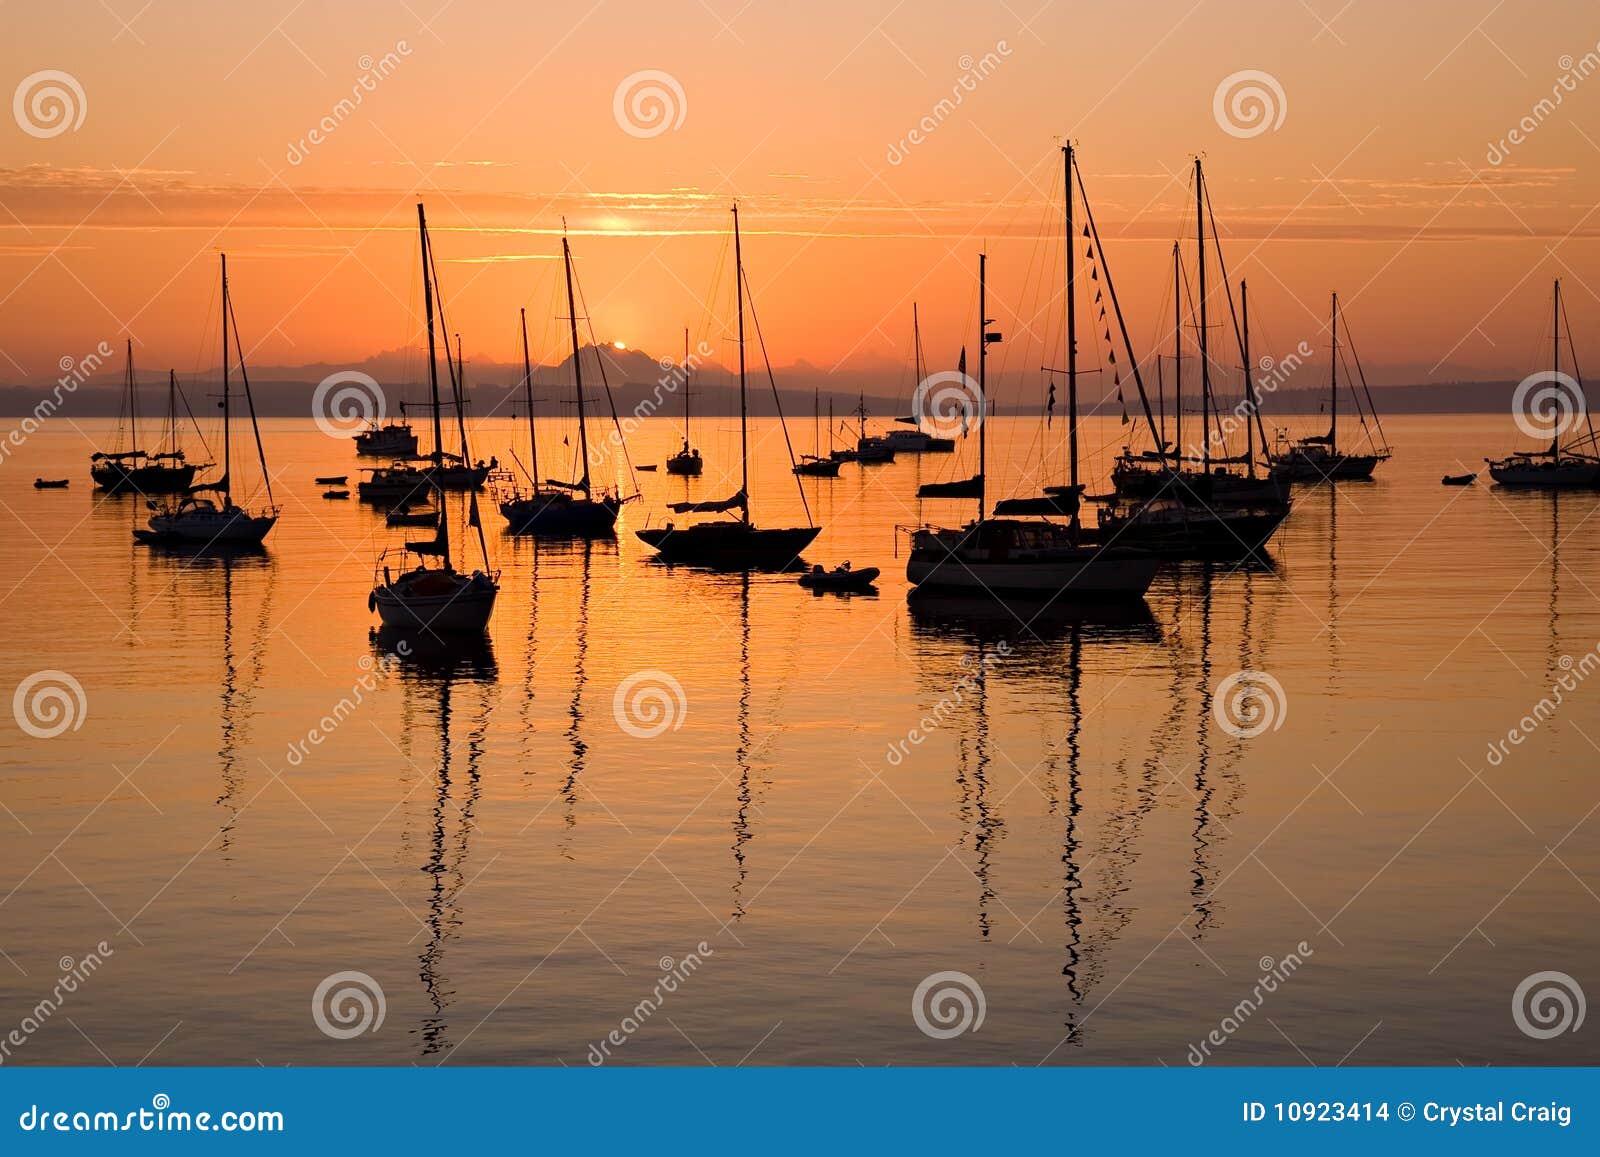 sailboats at sunrise in port townsend bay